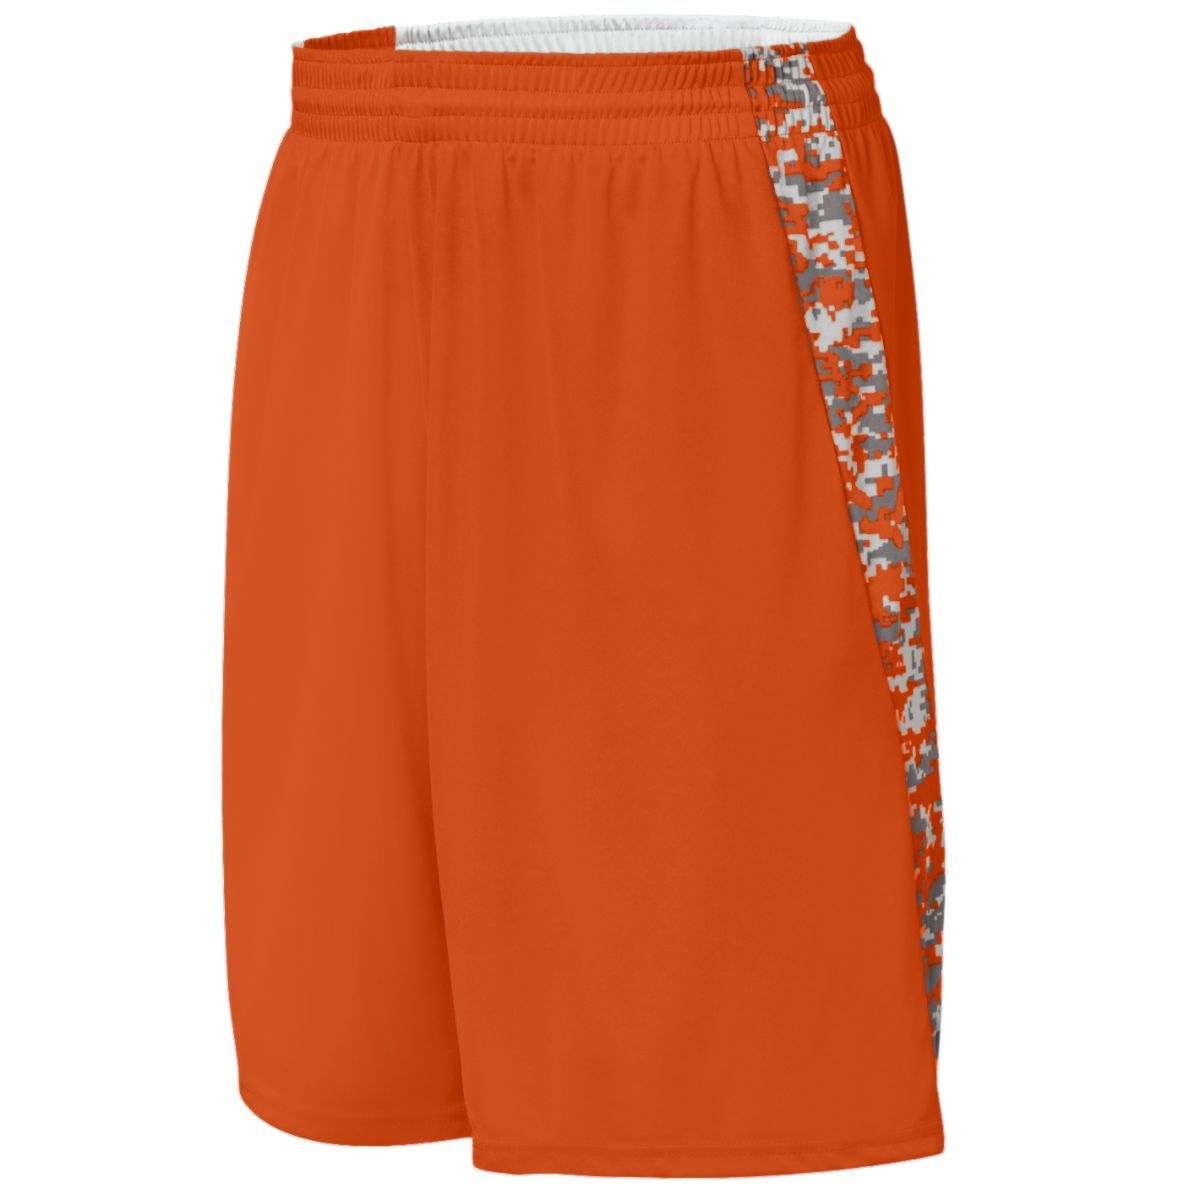 Augusta Sportswear Hook Shot Reversible Shorts in Orange/Orange Digi  -Part of the Adult, Adult-Shorts, Augusta-Products, Basketball, All-Sports, All-Sports-1 product lines at KanaleyCreations.com